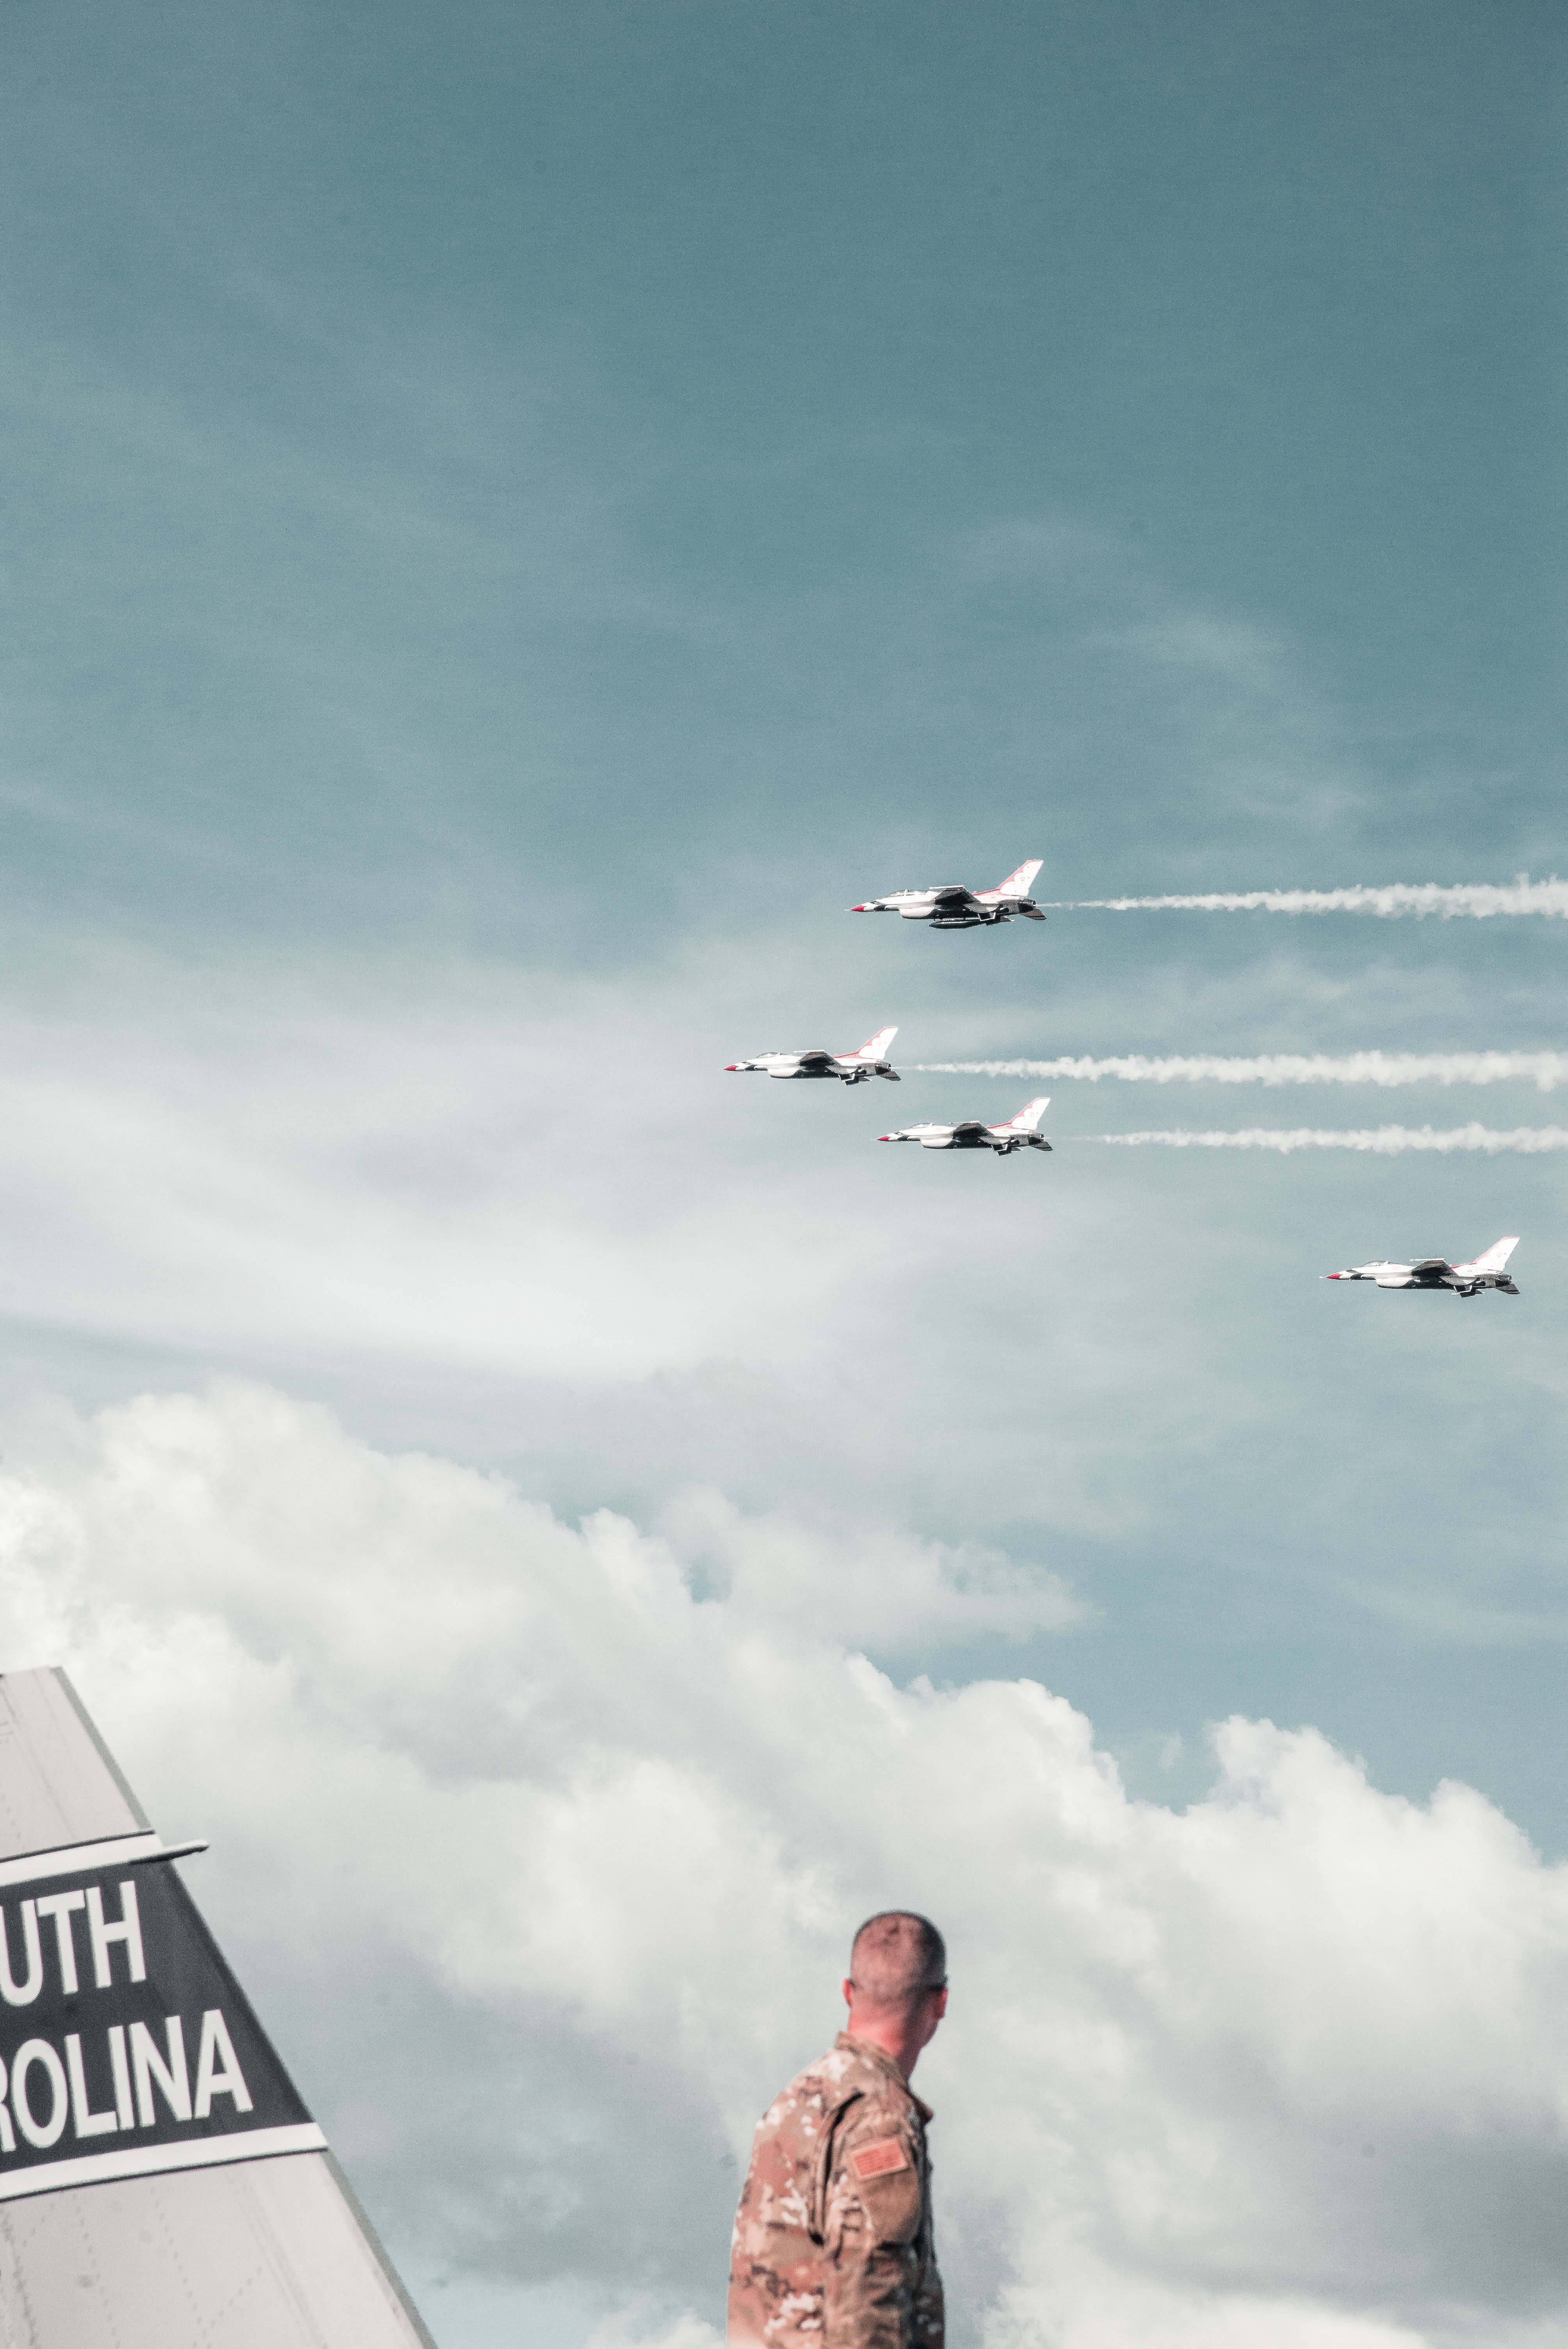 Pictured - A soldier looking over at four fighting jets flying | Source: Pexels 